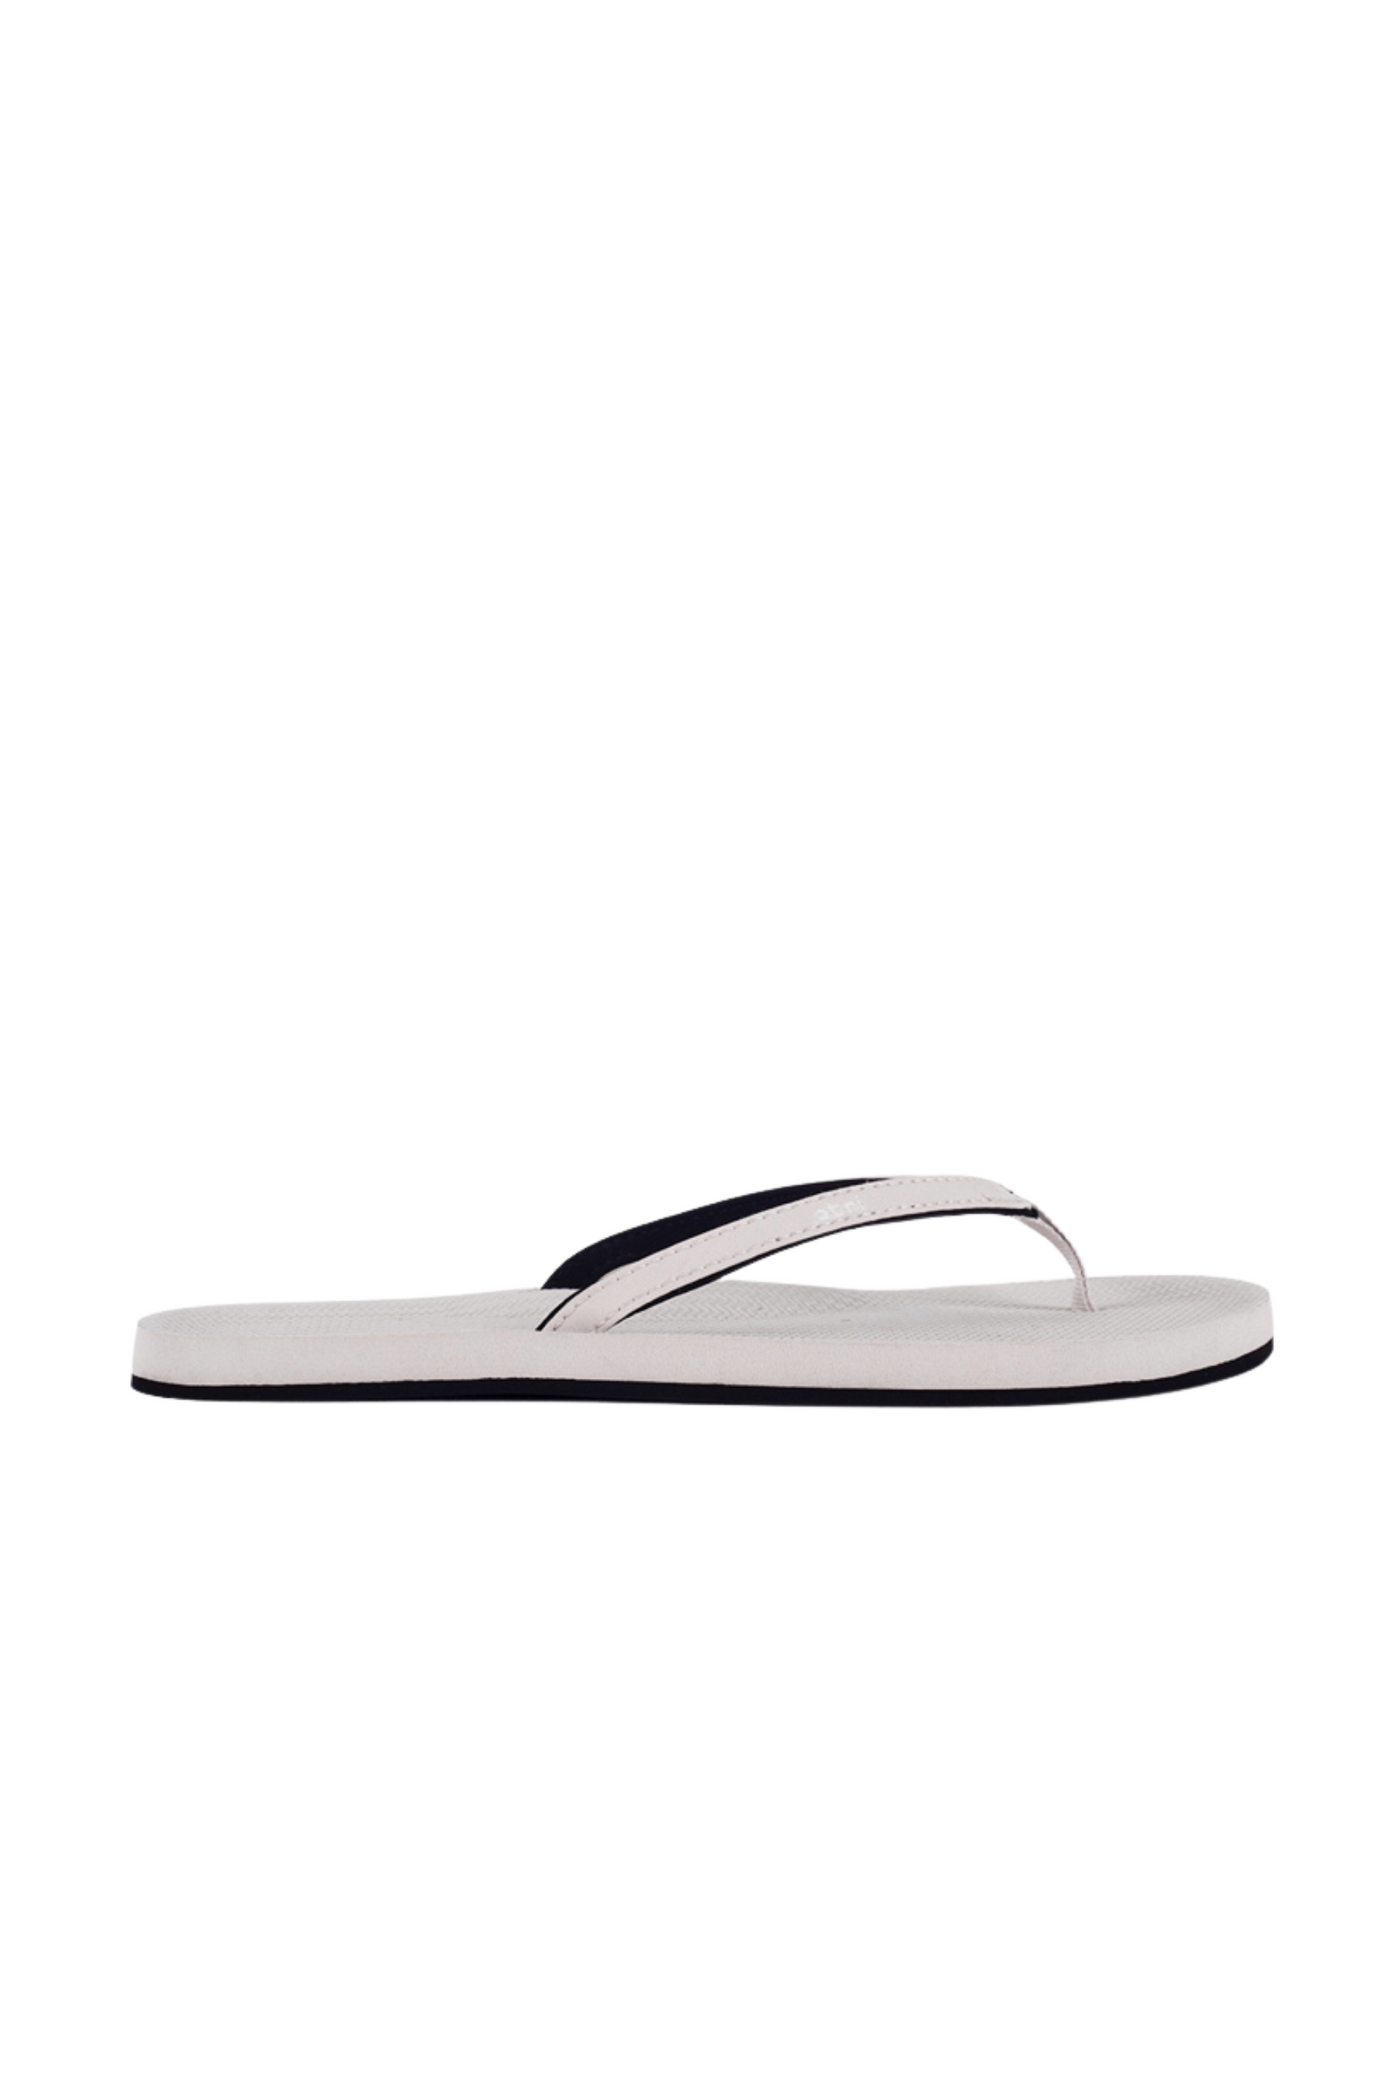 Indosole Women’s ESSNTLS Flip Flops in Sea Salt, available on ZERRIN with free Singapore shipping